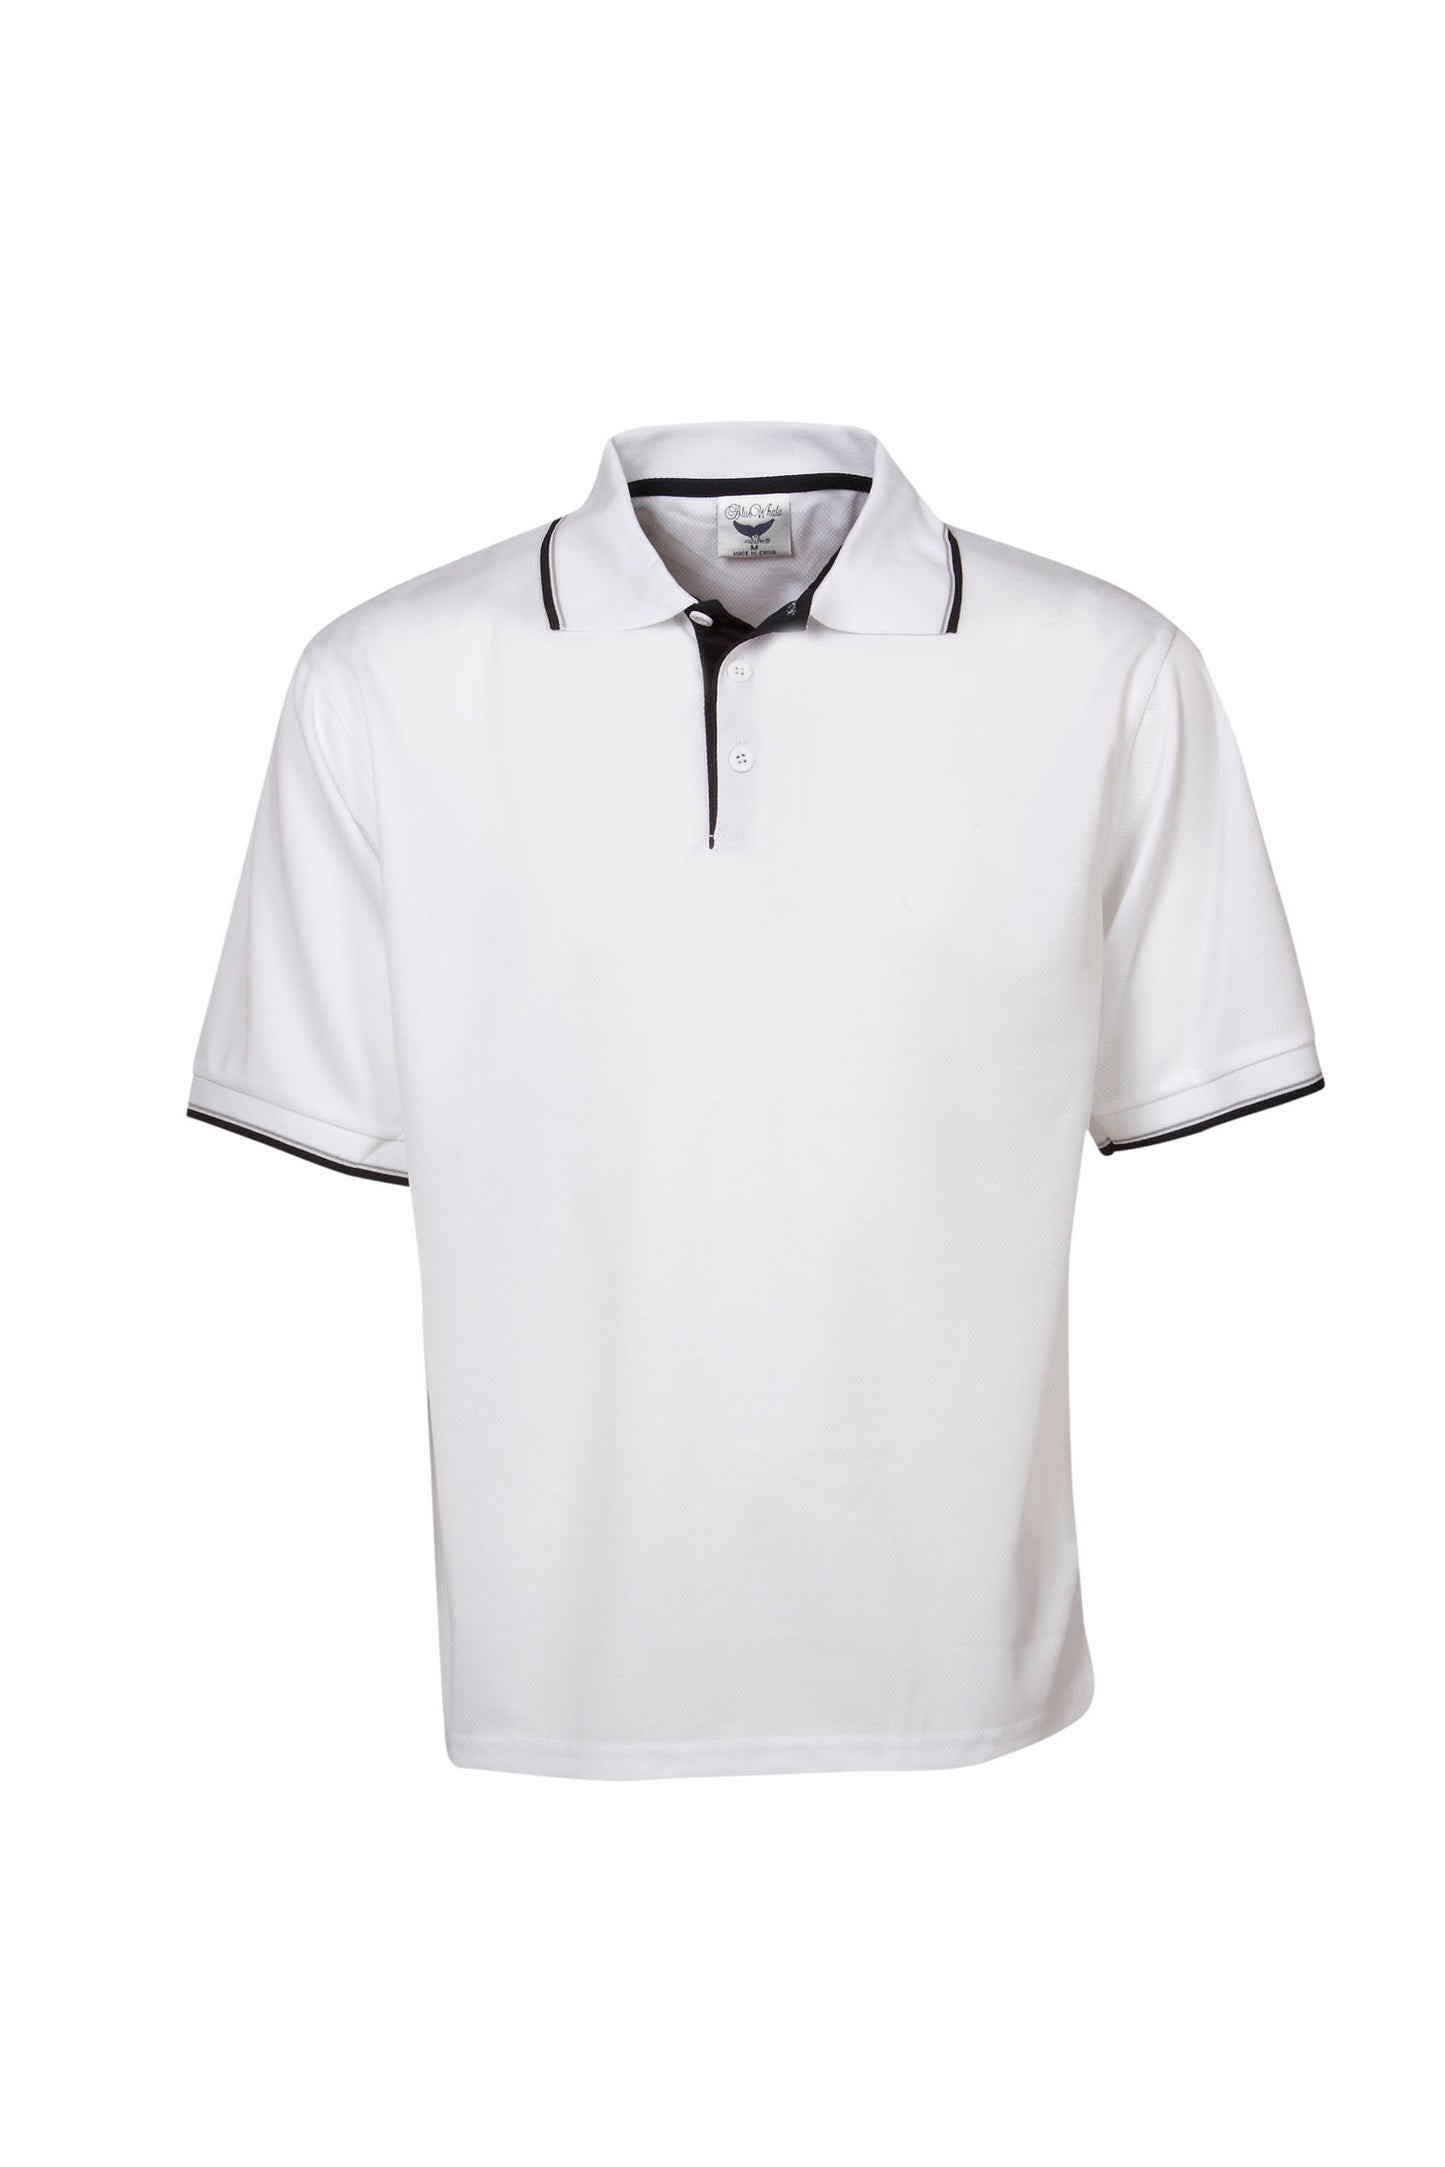 Blue Whale Mens Adults Cooldry Micro Mesh Polo